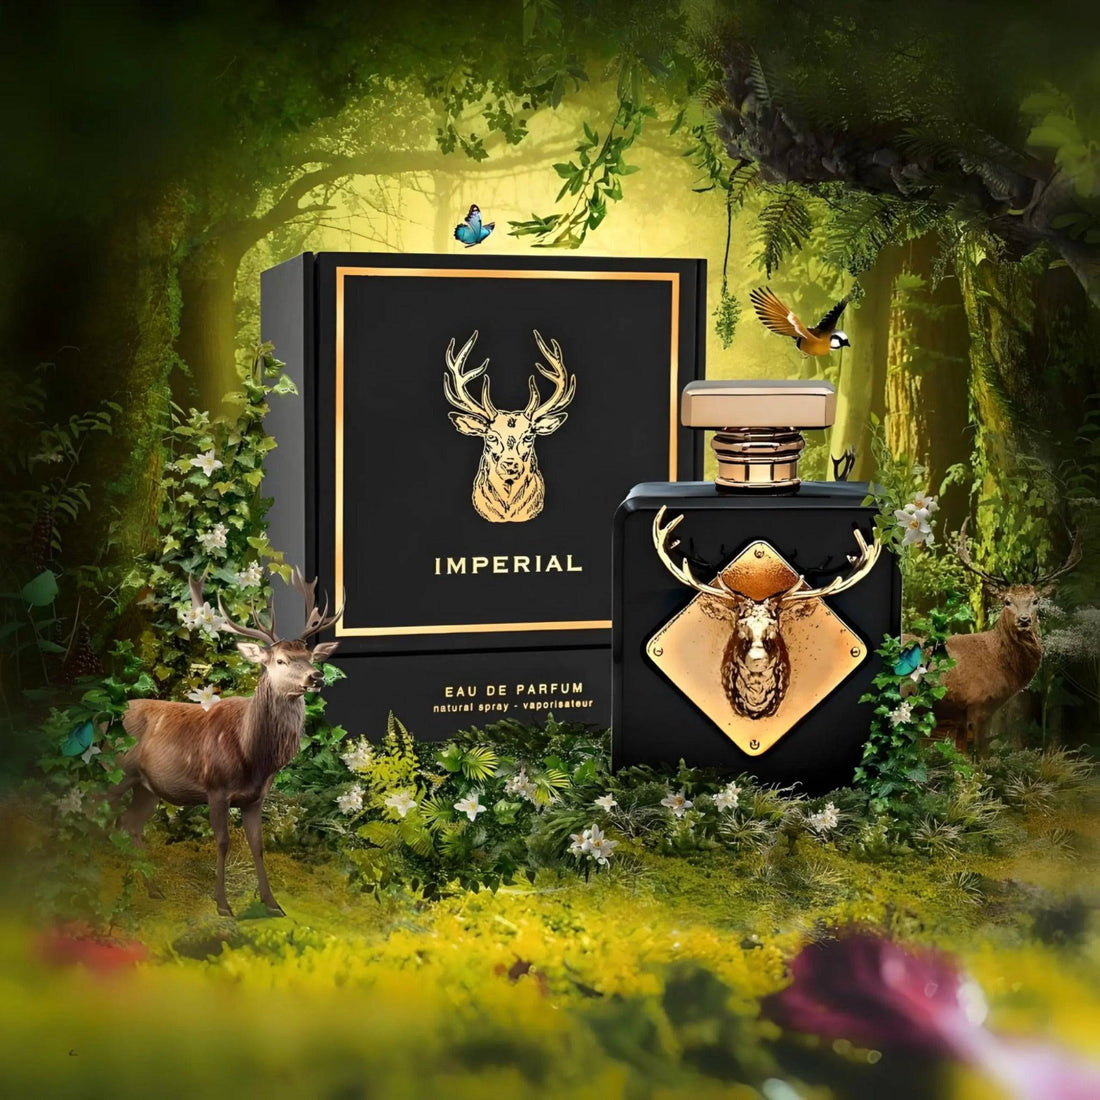 Regal 100ml bottle of Imperial EDP by Fragrance World, symbolizing its luxurious and commanding scent profile.